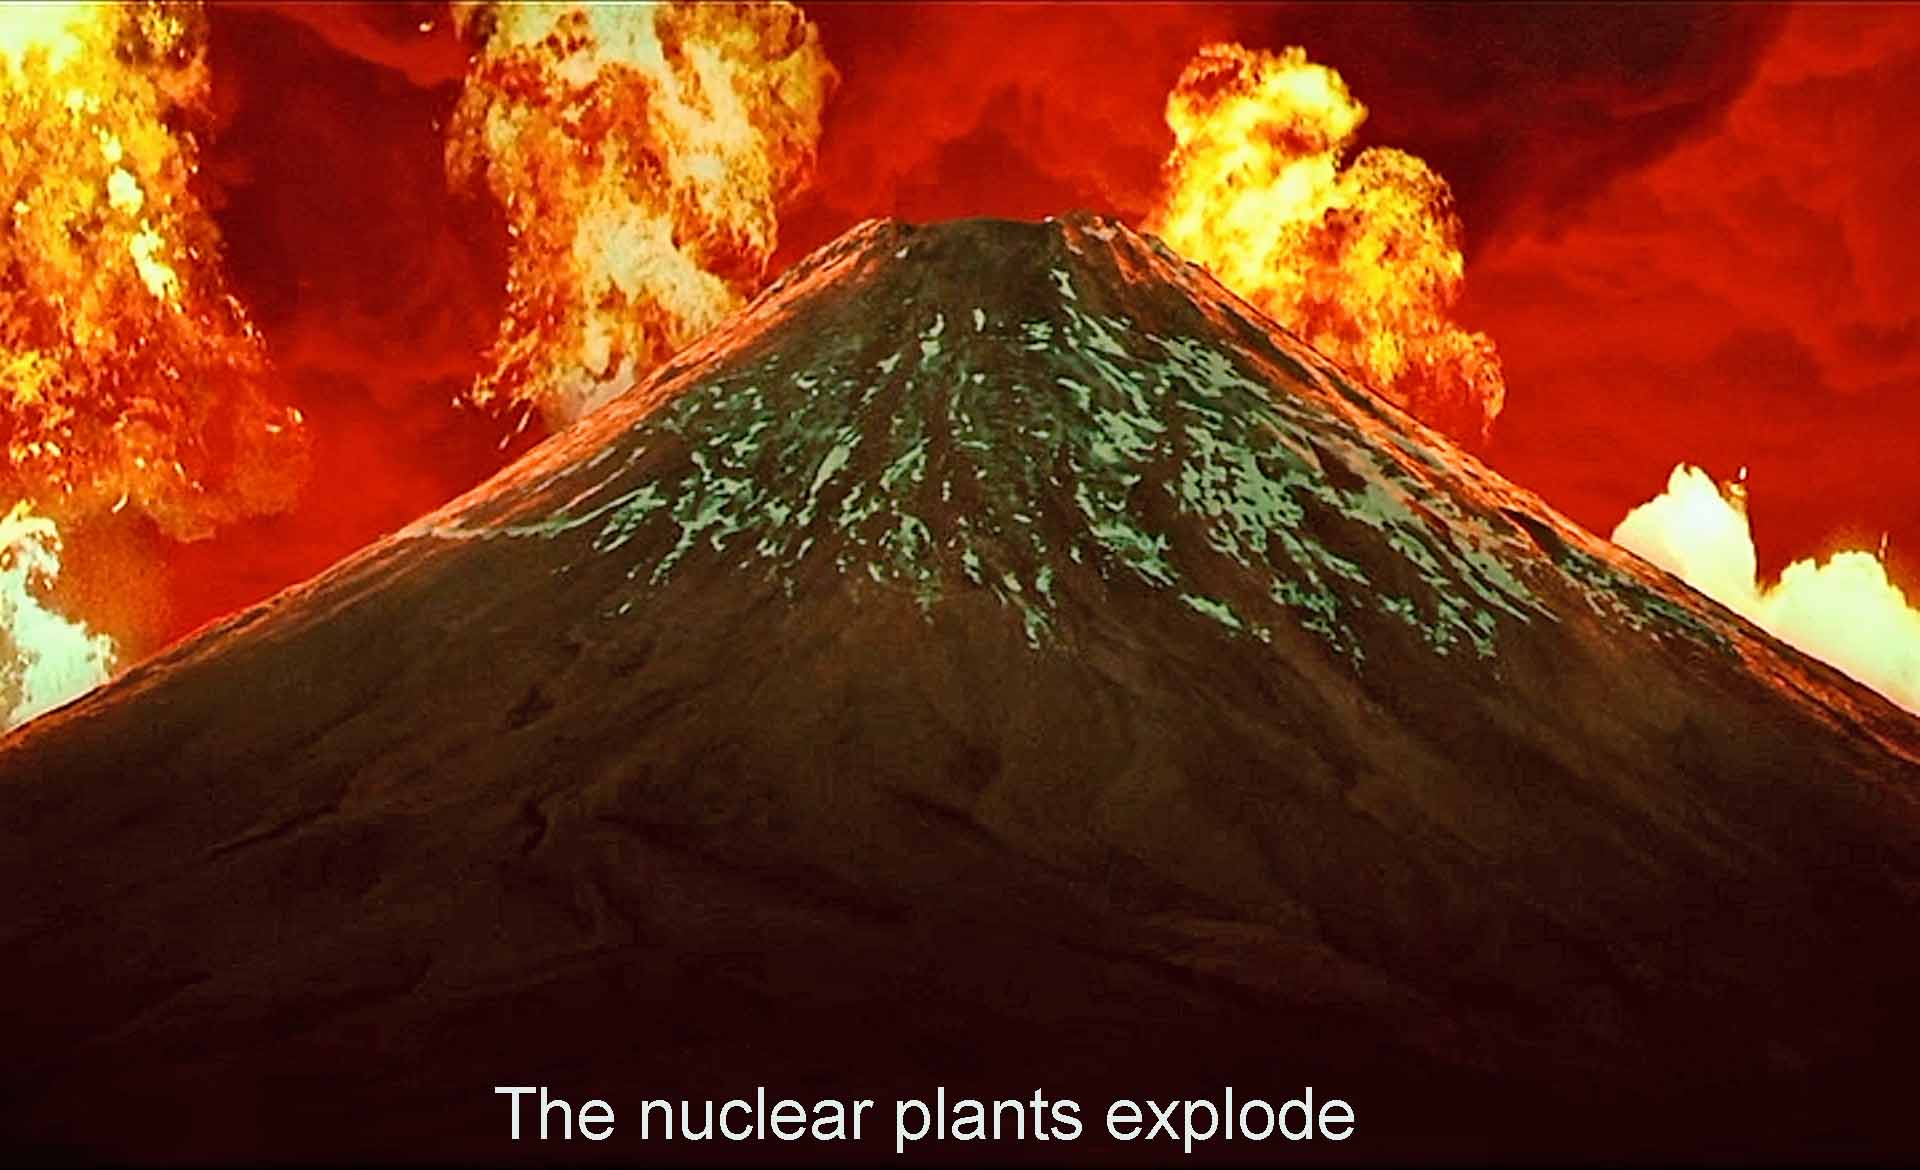 The nuclear plants explode